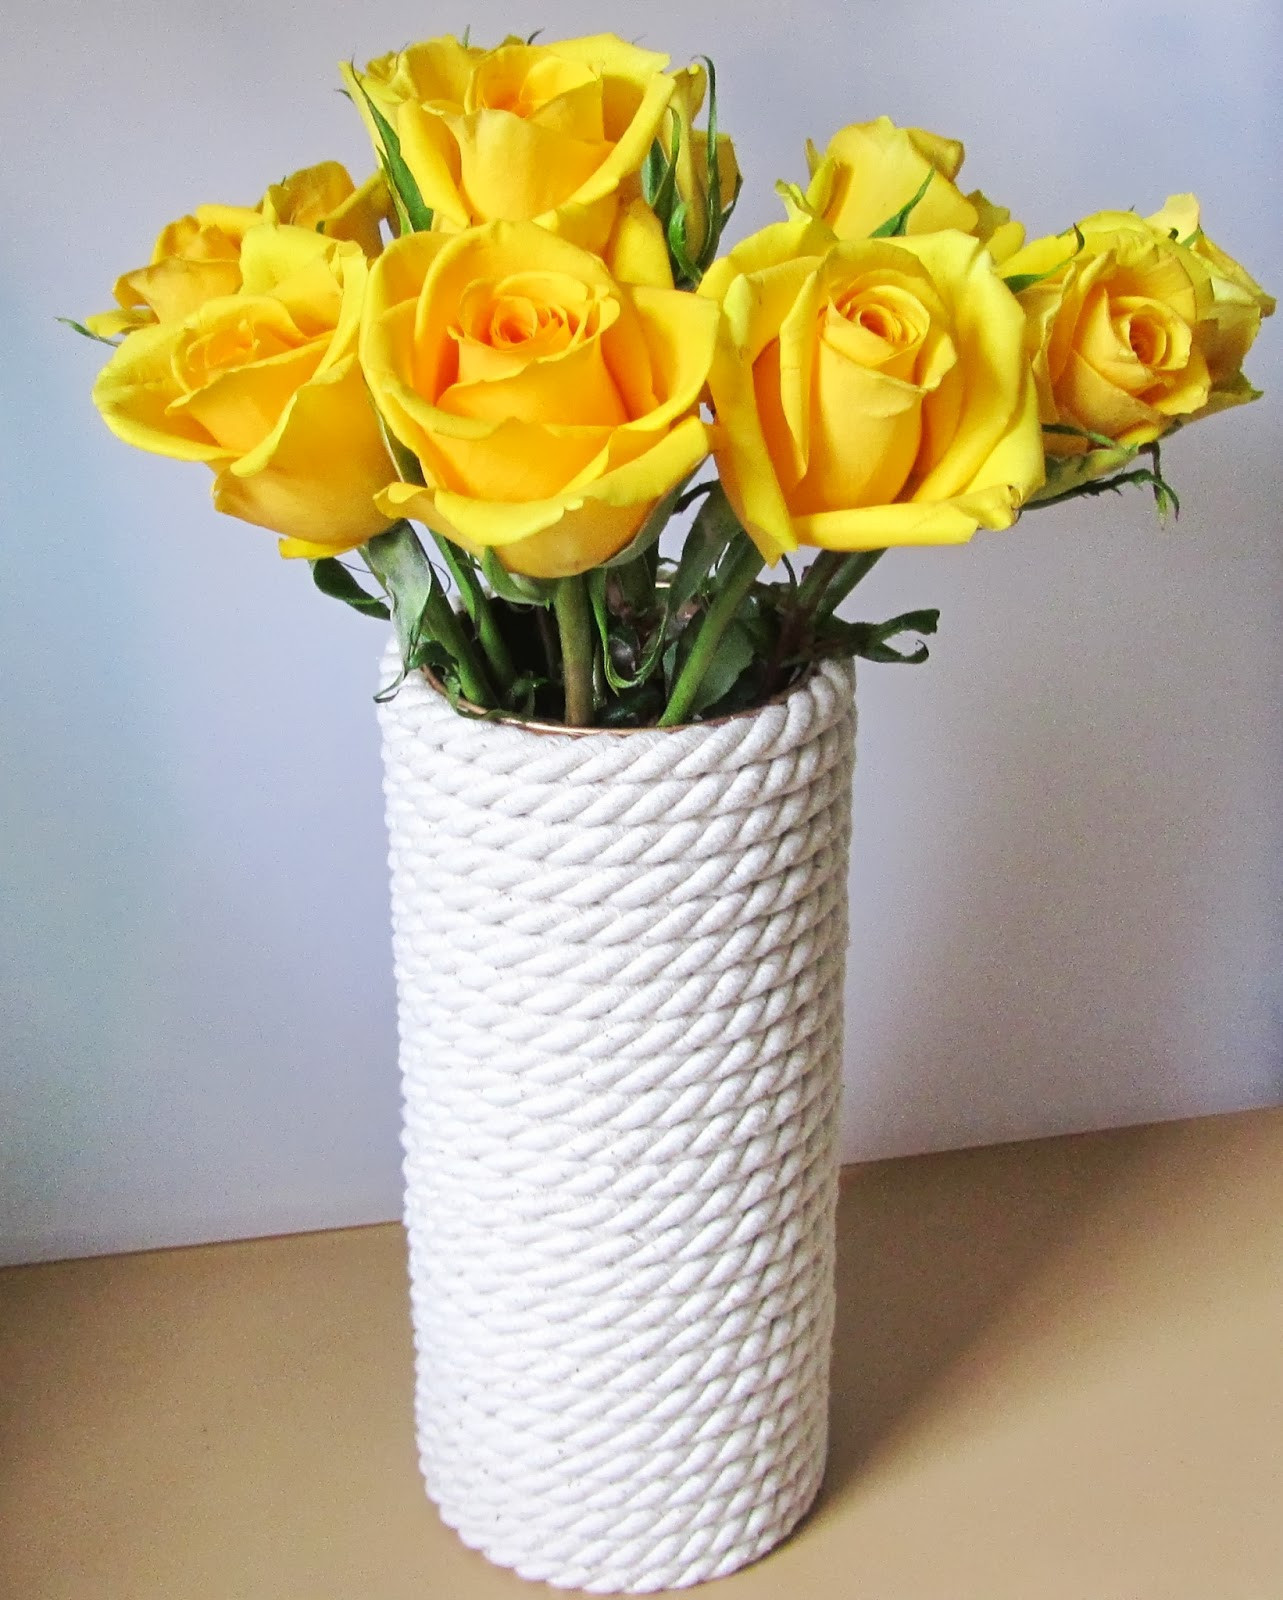 16 Popular Vase Fillers for Wedding Centerpieces 2024 free download vase fillers for wedding centerpieces of white vase filler pictures nautical centerpieceh vases vase savei 0d throughout white vase filler pictures nautical centerpieceh vases vase savei 0d 